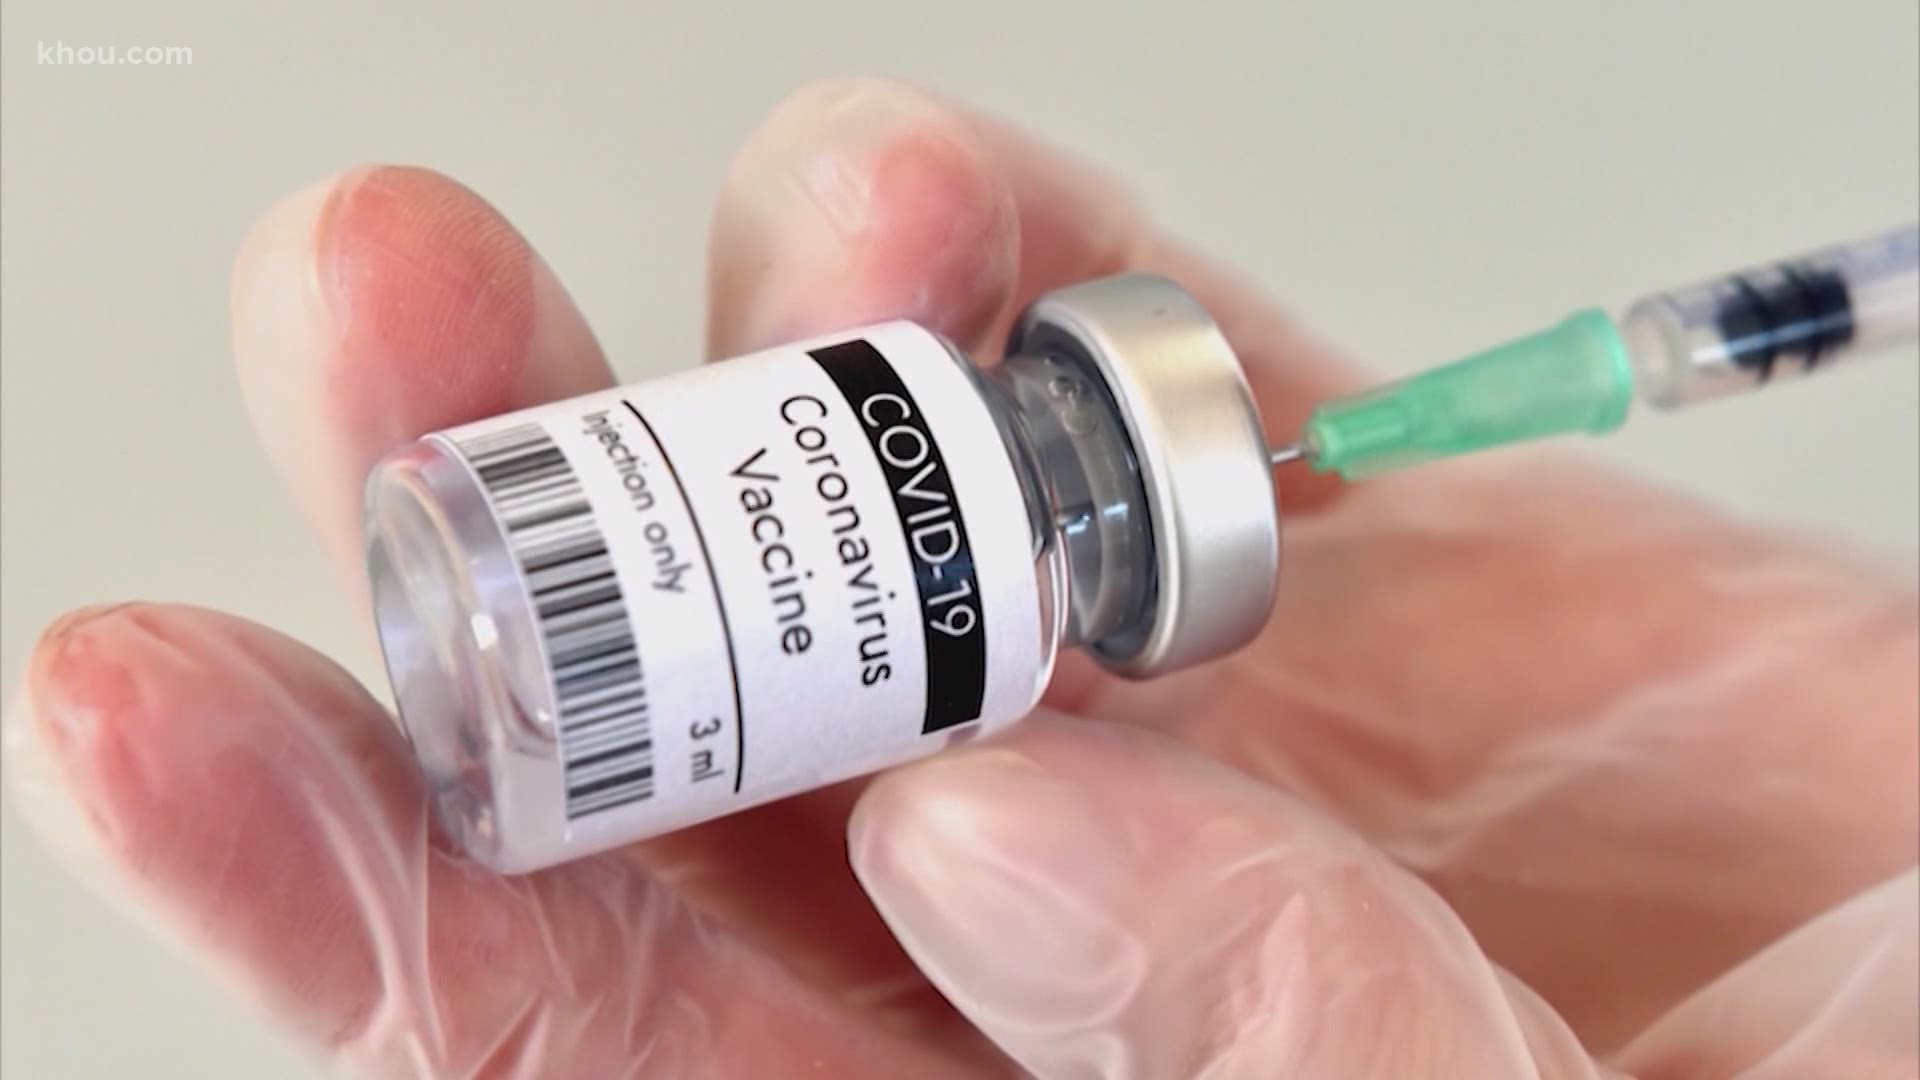 Doctors say the vaccine contains no live virus, so experts said you can't get COVID-19 from the shot.